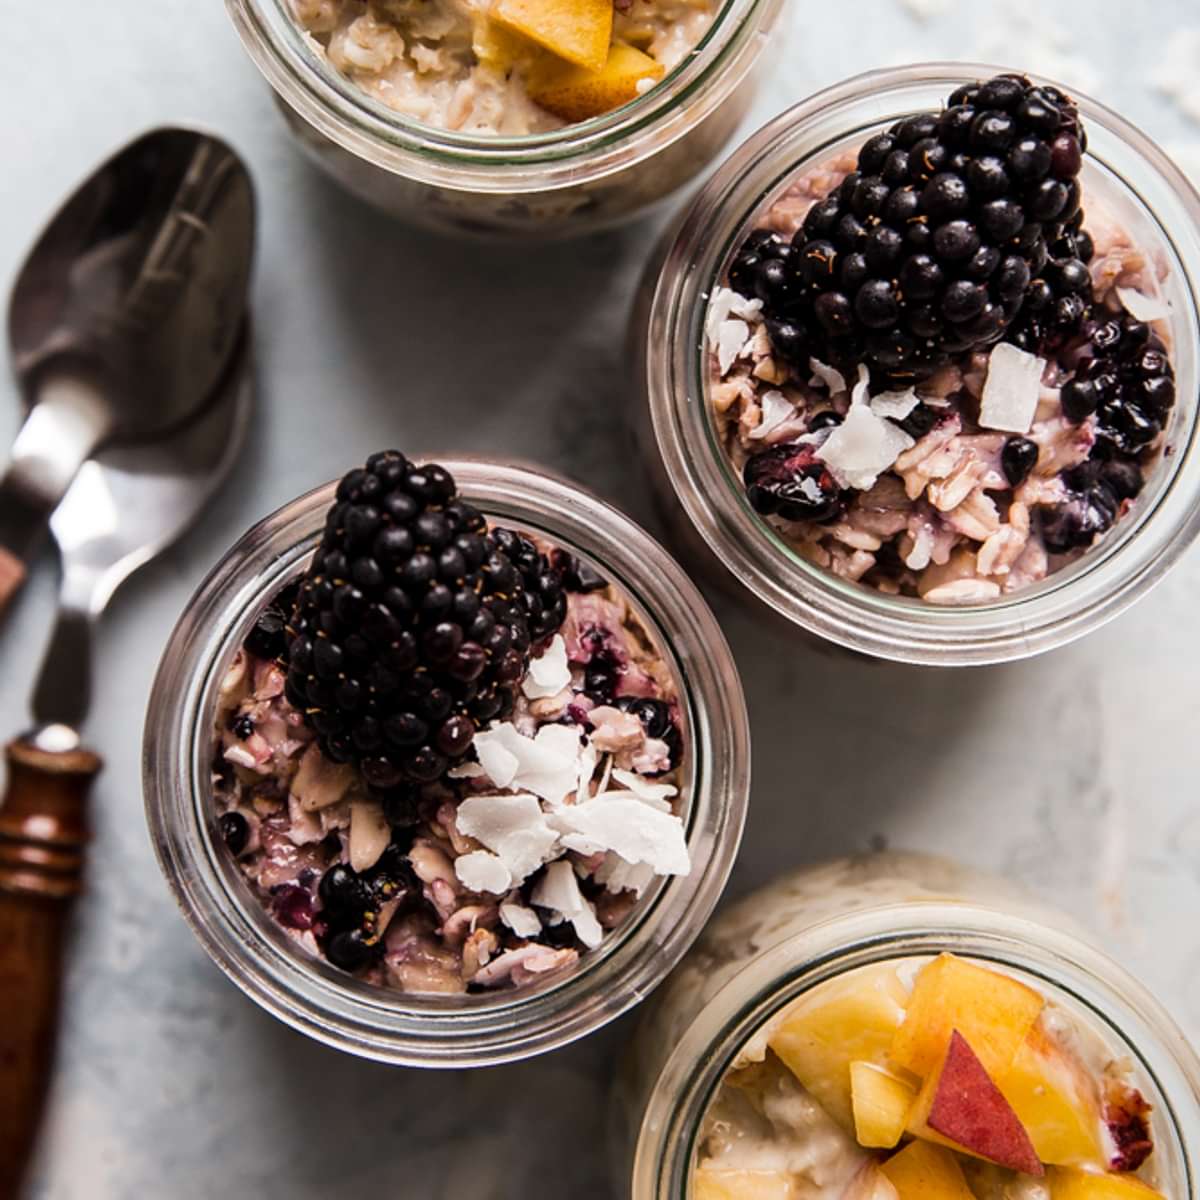 Peaches and Cream overnight oats next to blackberry overnight oats in glass jars next to two spoons.